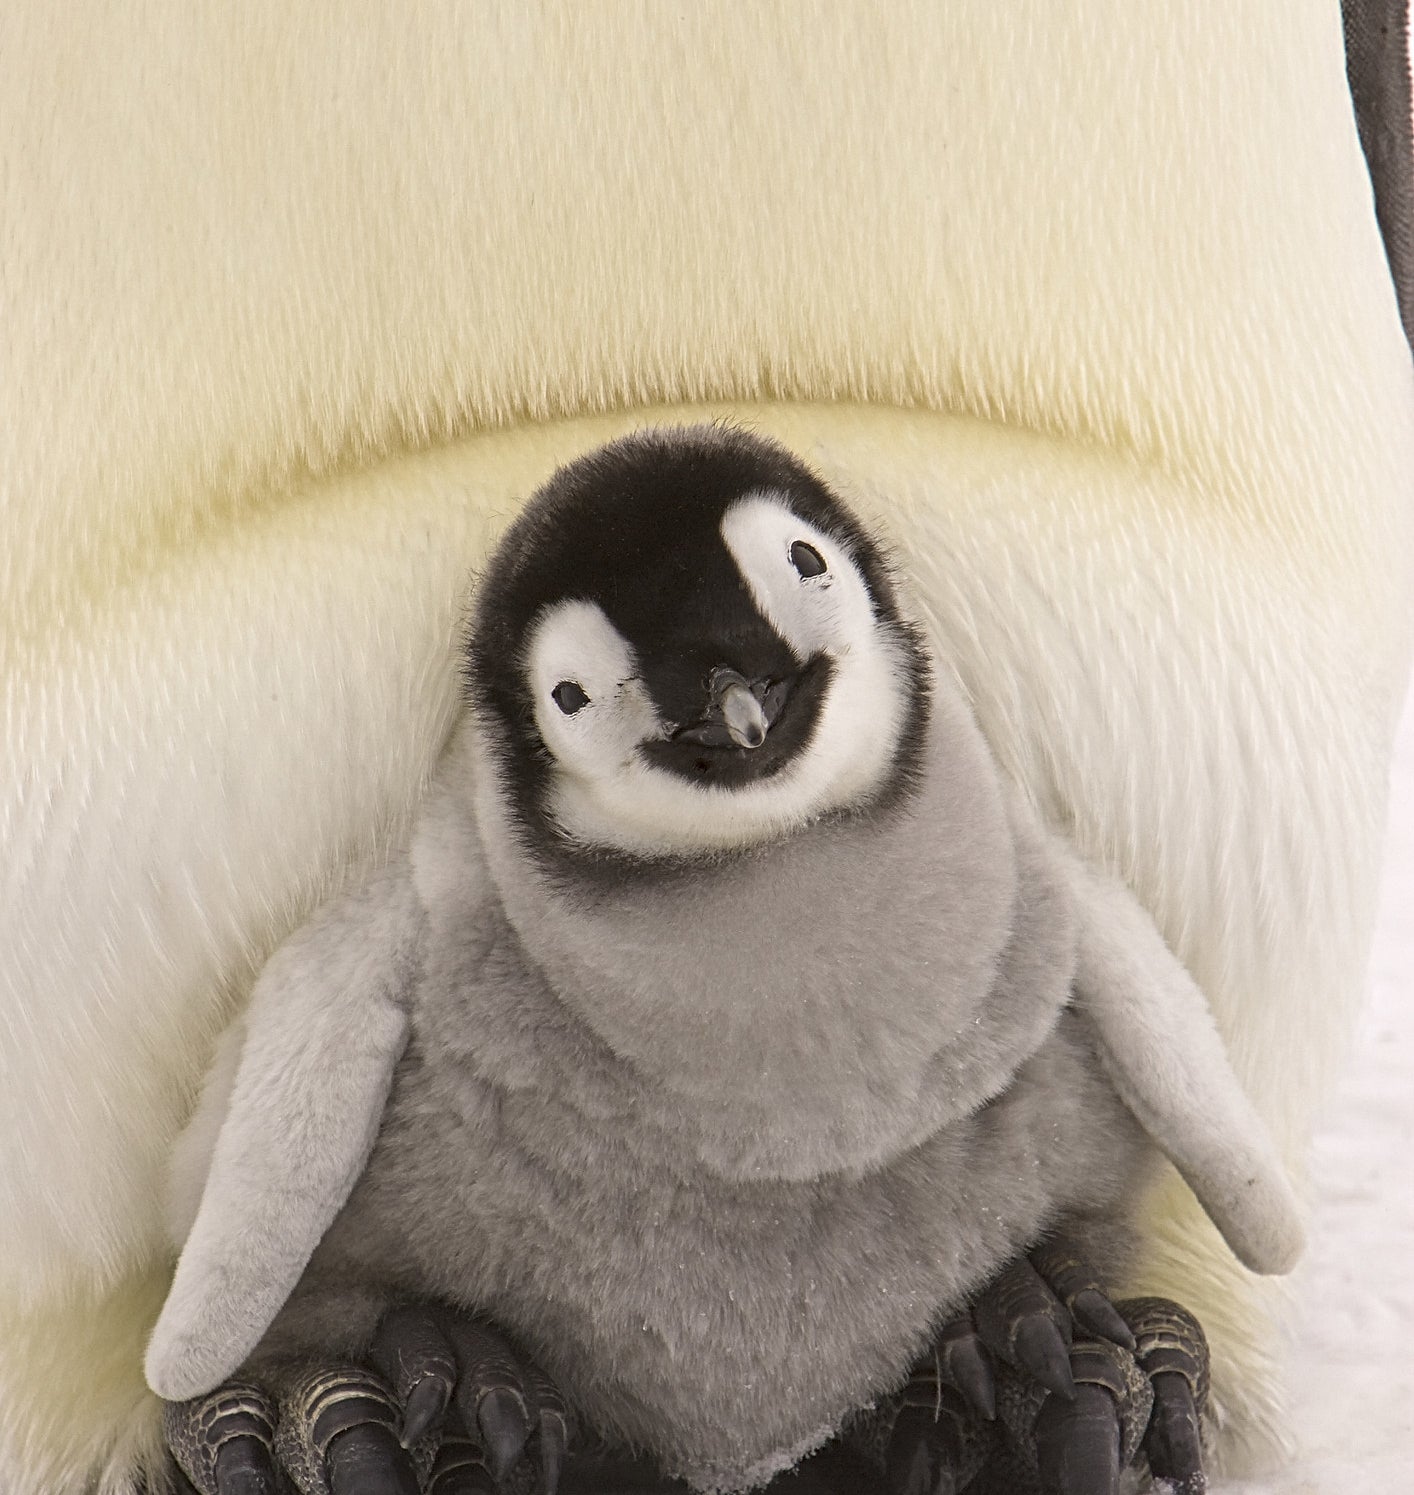 a penguin chick looking curious